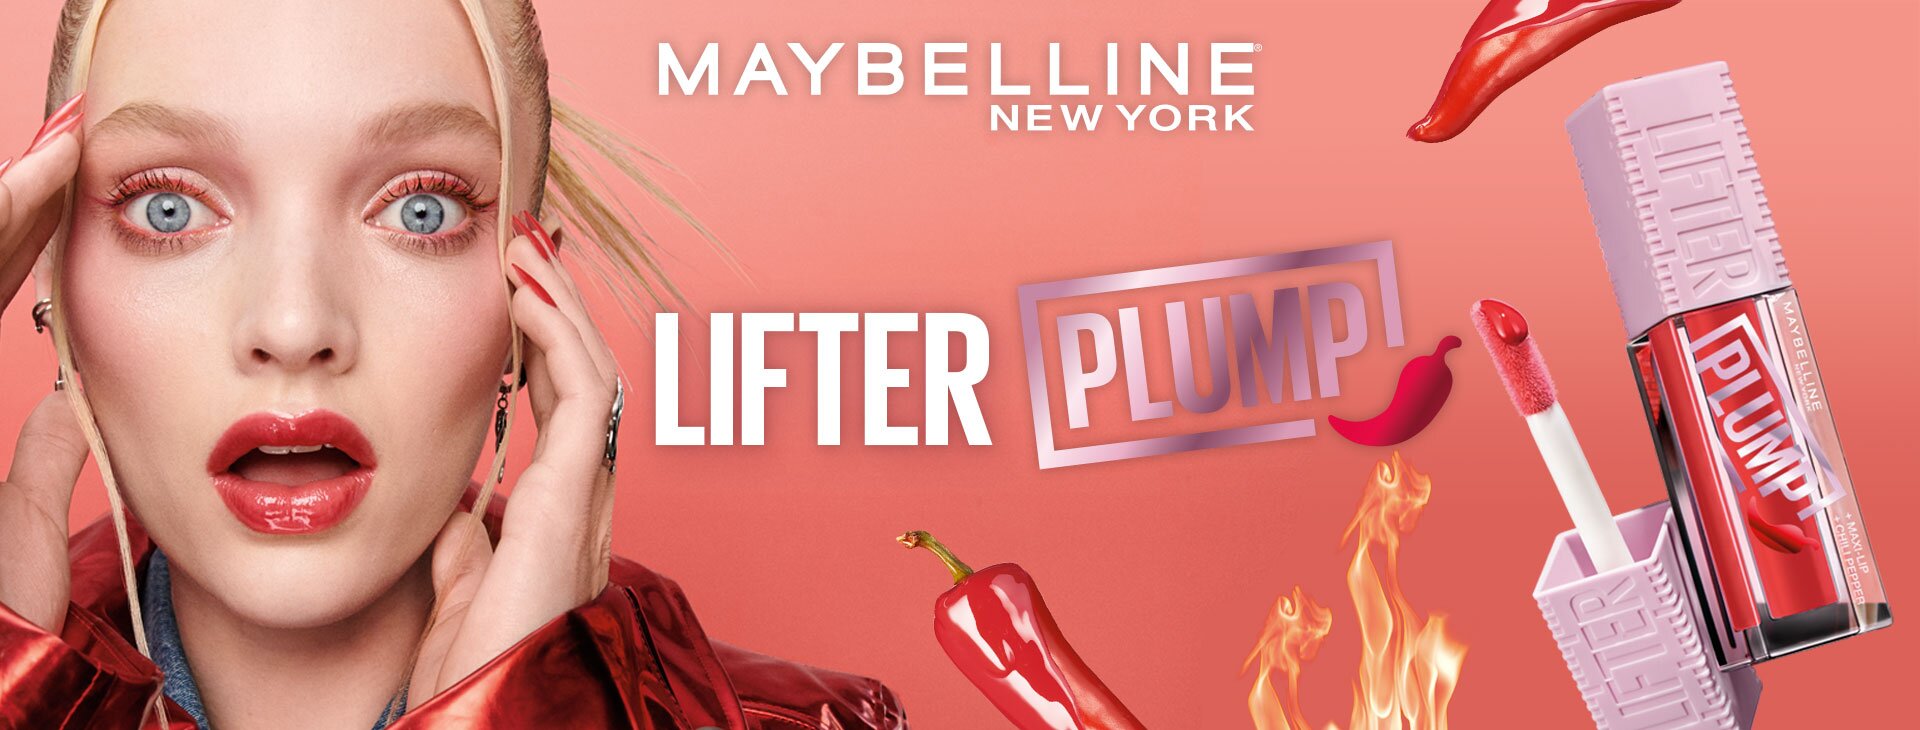 Lifter Plump Maybelline New York